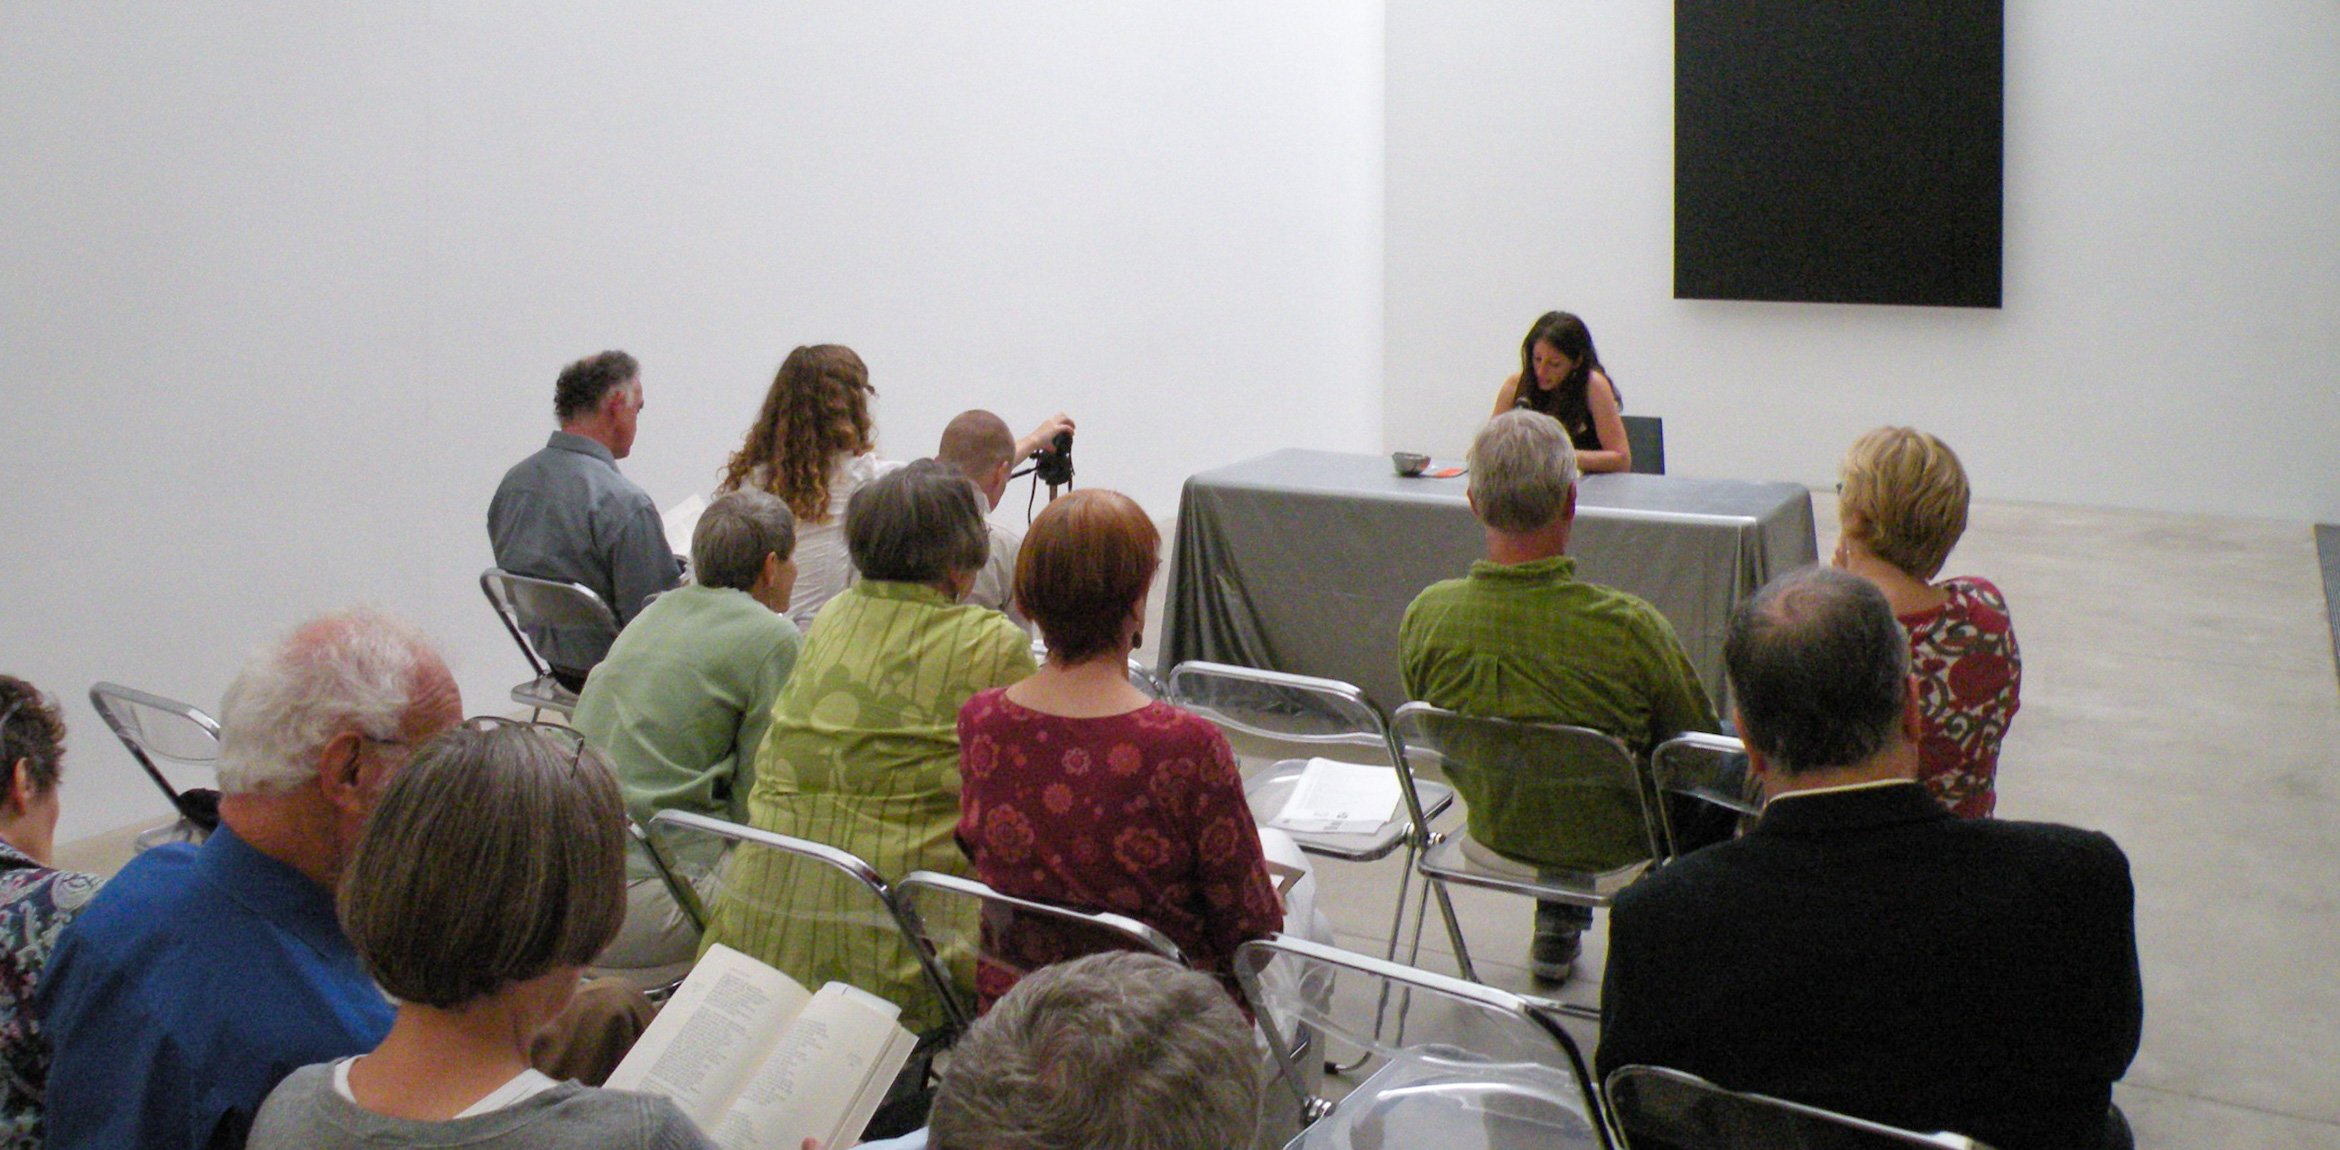 A community member sits at a table in front of Ellsworth Kelly's "Blue Black" and reads from a page into a microphone for an audience.